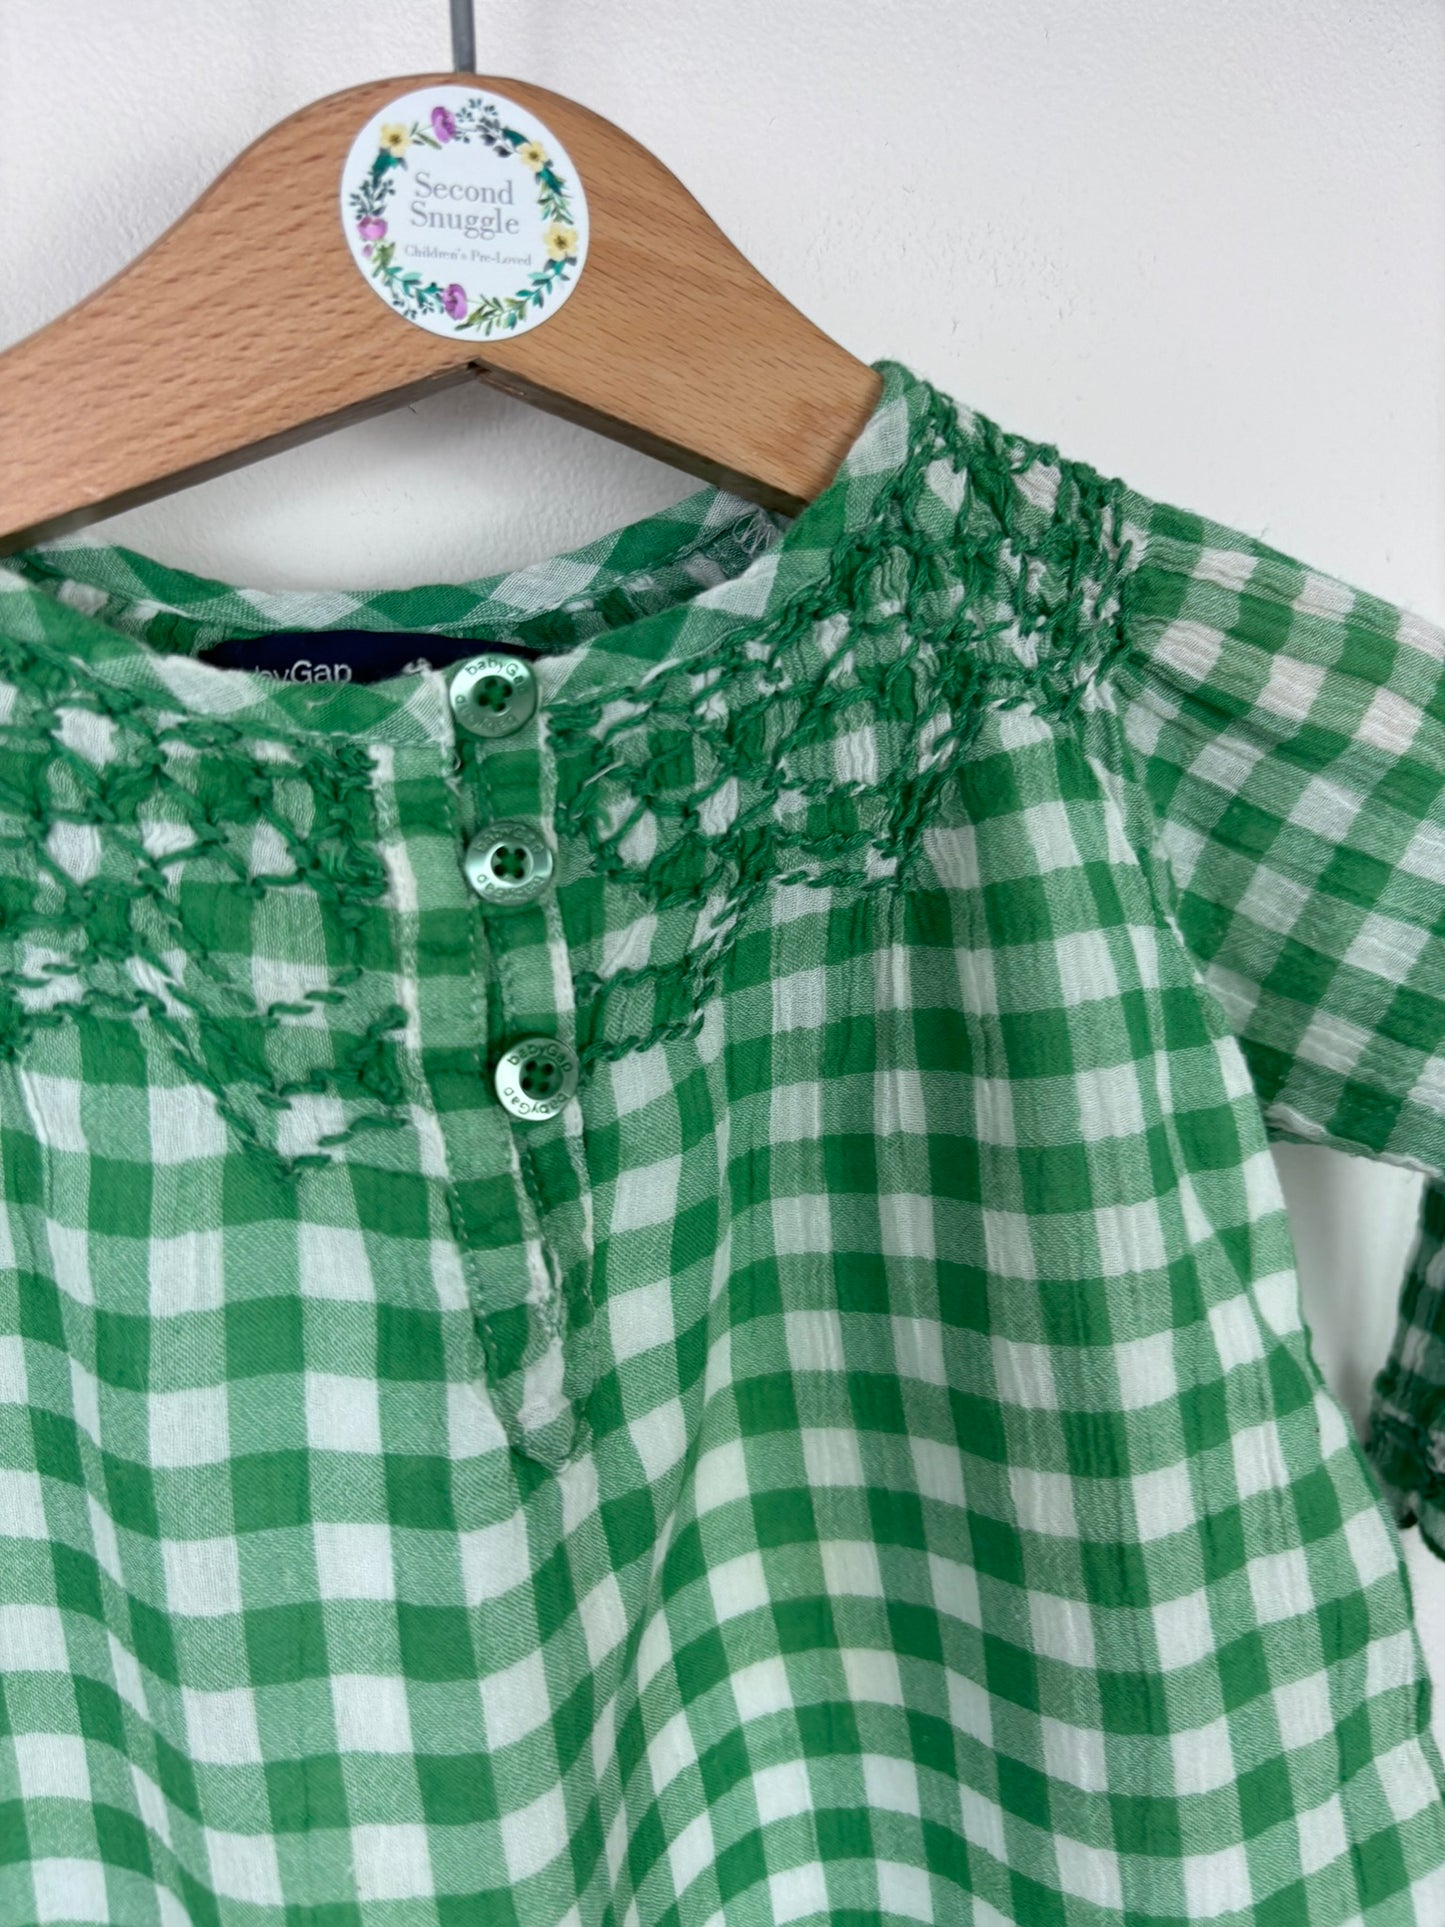 Baby Gap 3-6 Month-Dresses-Second Snuggle Preloved